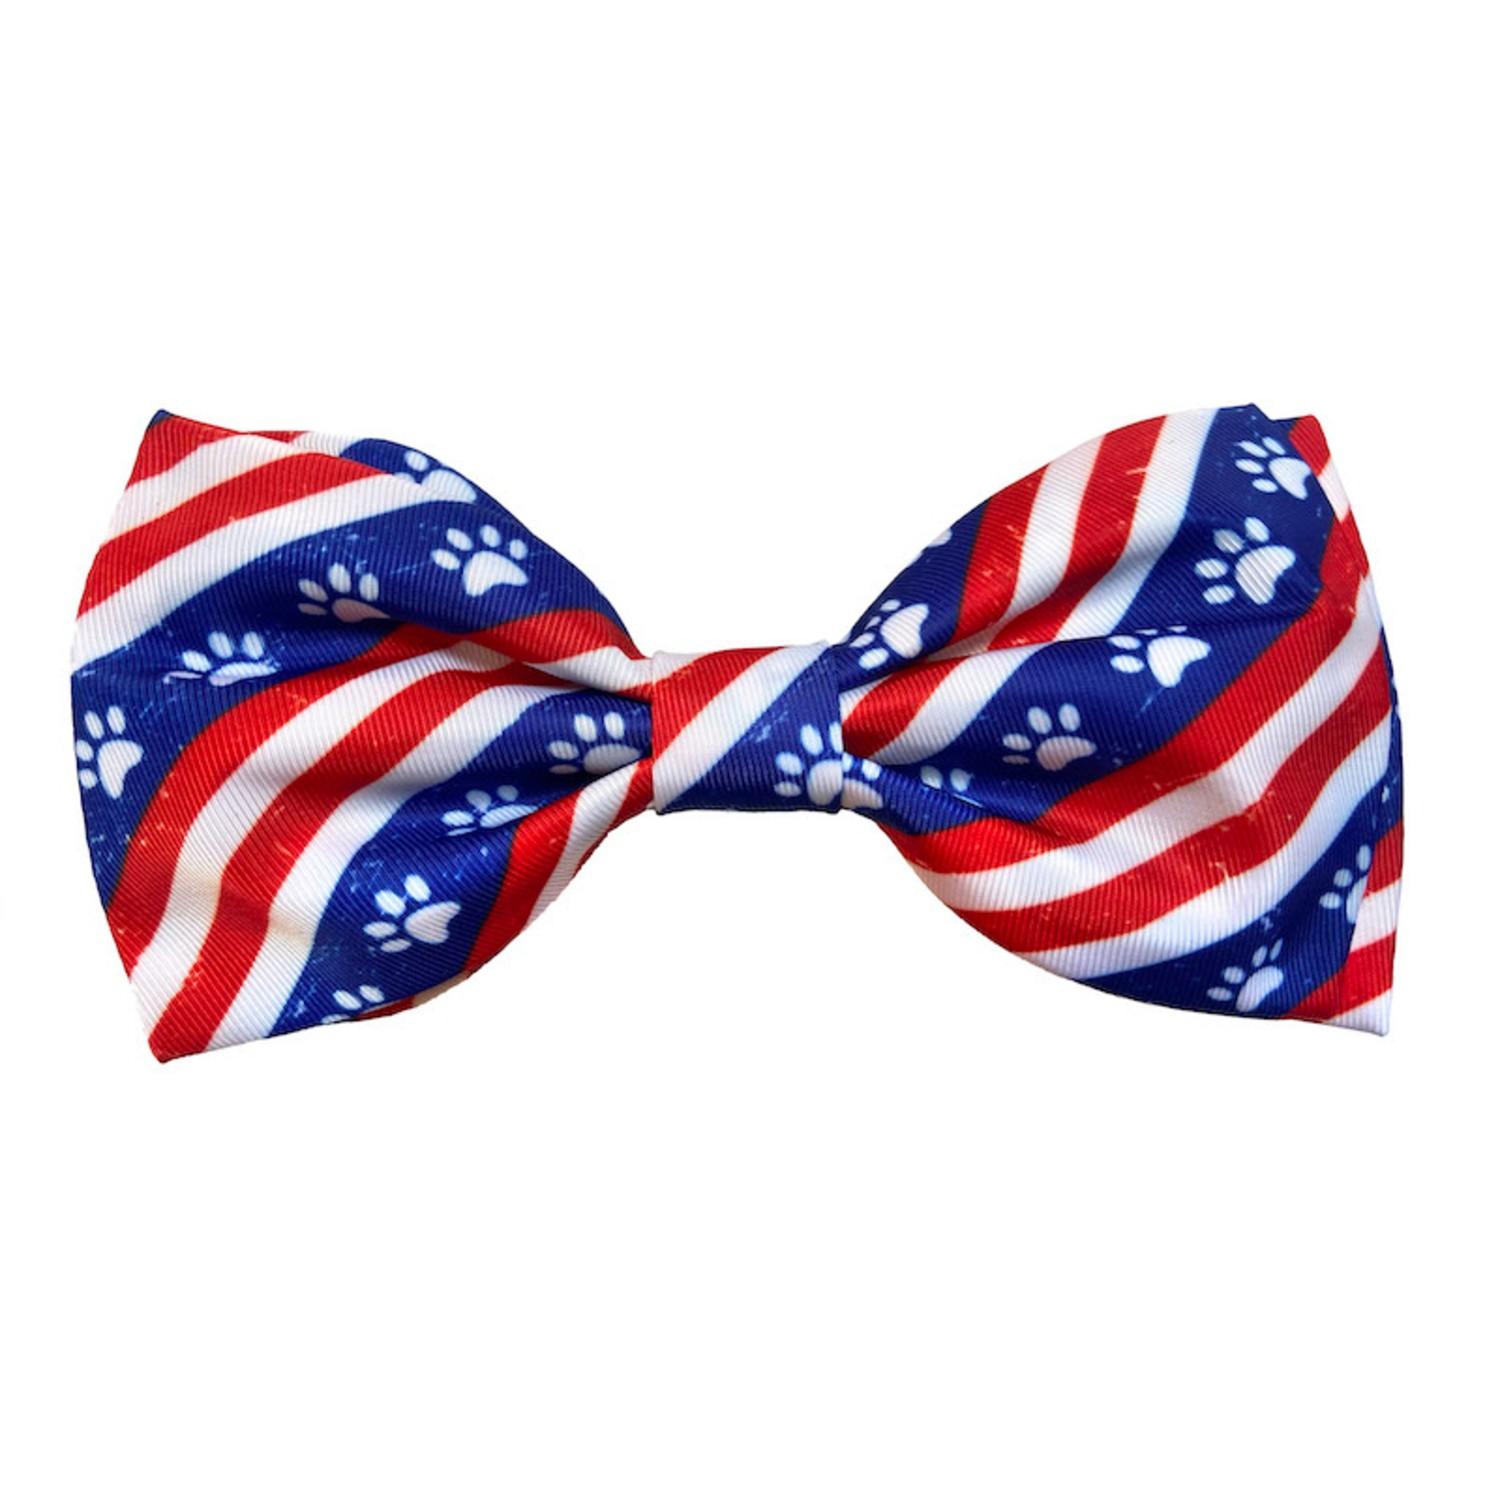 Huxley & Kent Patriotic Dog and Cat Bow Tie Collar Attachment - Paws & Stripes